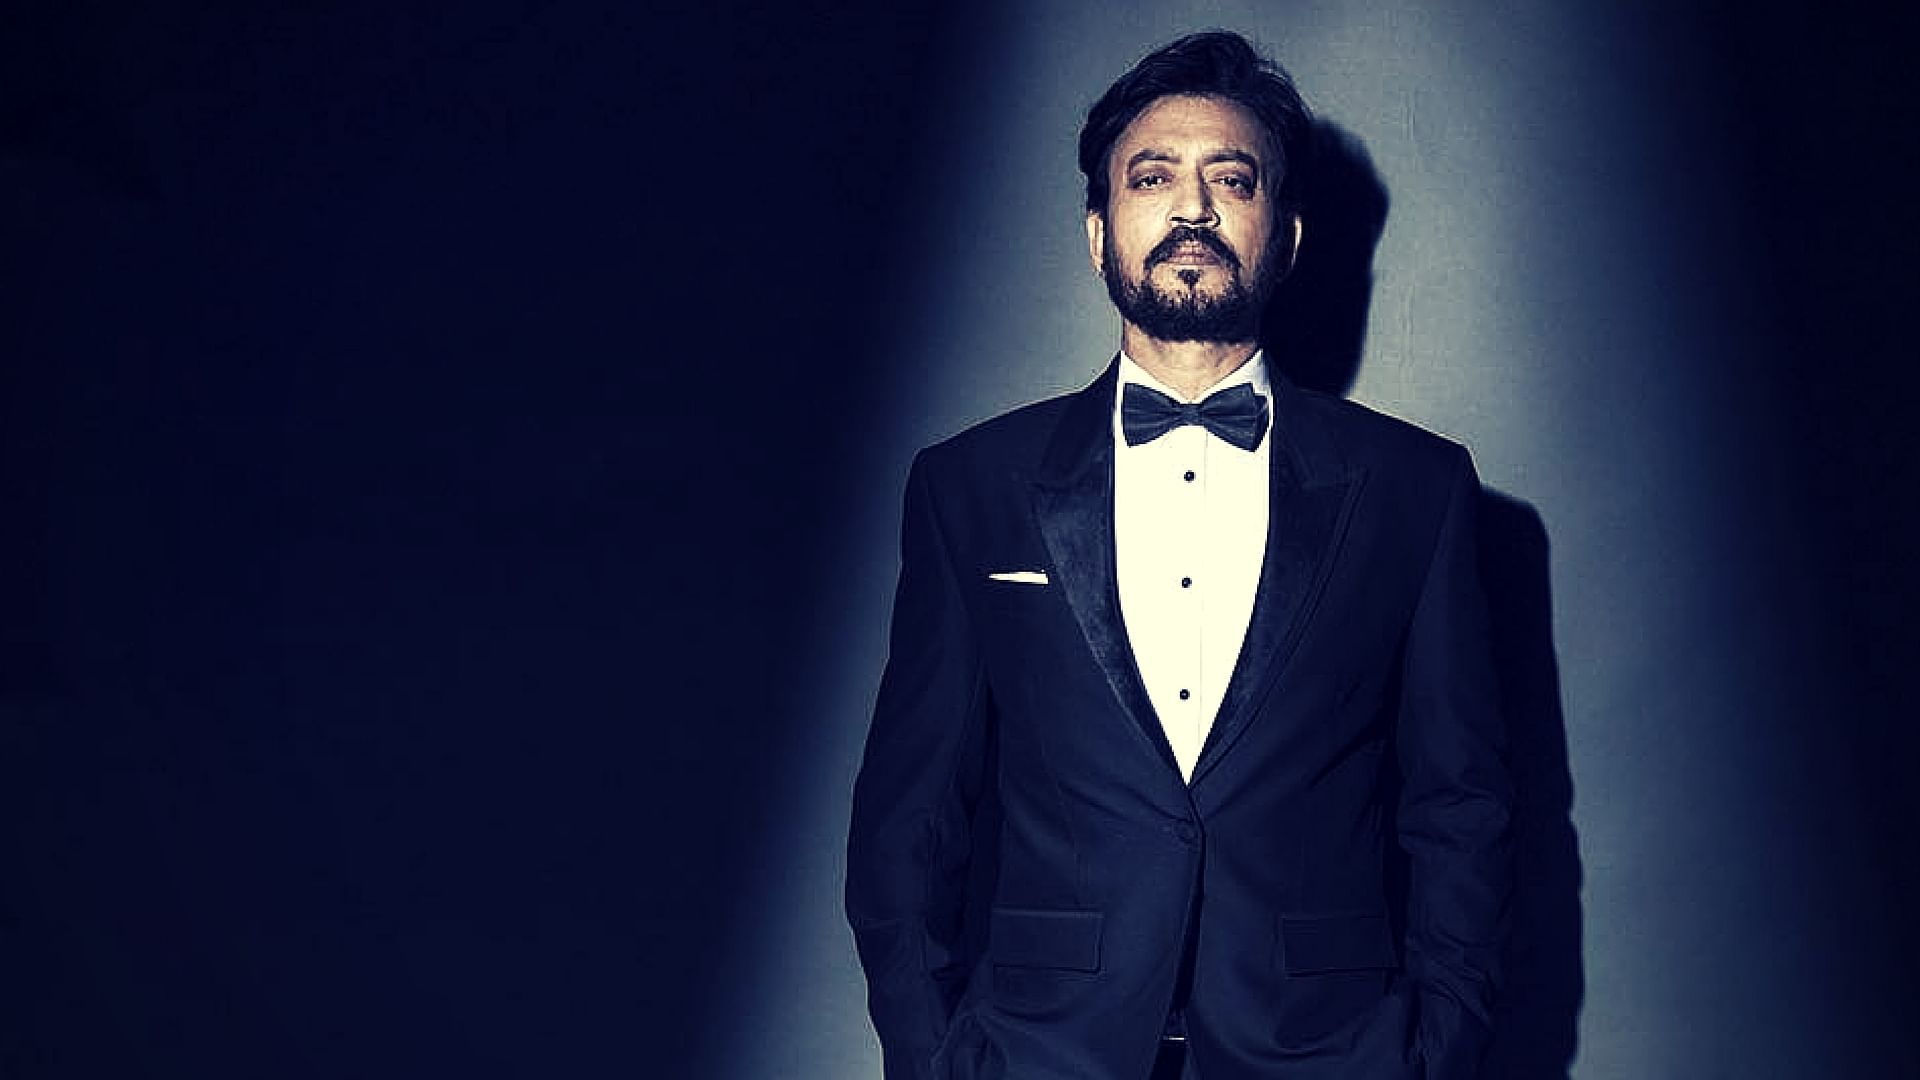 Irrfan Khan’s acting prowess stands unmatched in Bollywood today (Photo: <a href="https://www.facebook.com/IrrfanKhan/photos/pb.1593420754236140.-2207520000.1452148950./1671626223082259/?type=3&amp;theater">Facebook/IrrfanKhan</a>)